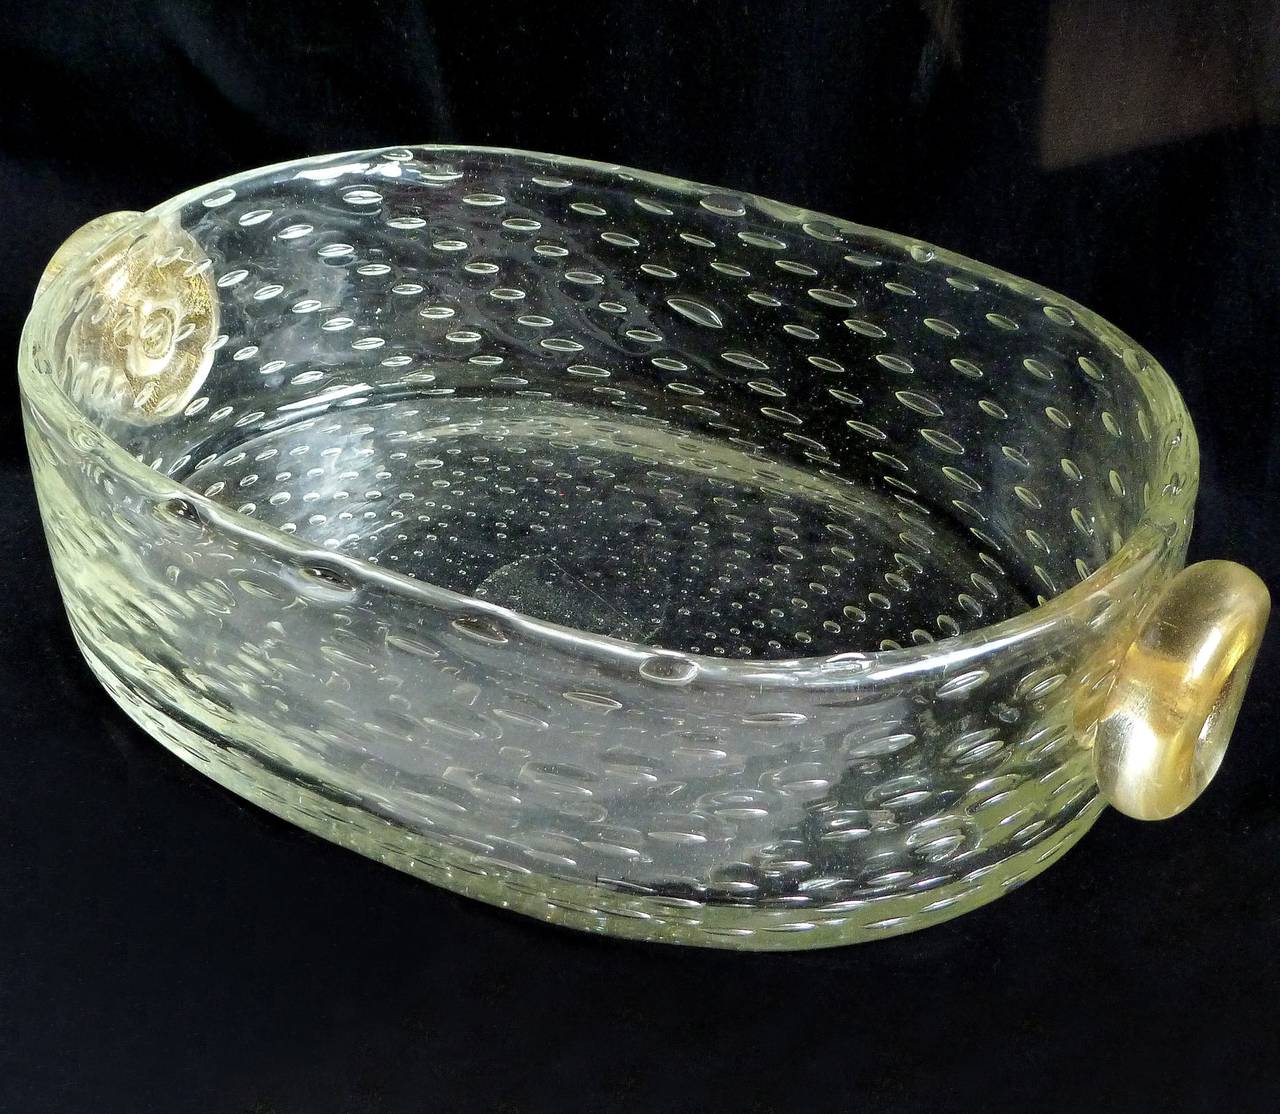 FREE Shipping Worldwide! See details below description.

Chick and Elegant Murano Hand Blown Controlled Bubbles with Gold Flecks Medallions Art Glass Jewelry Tray / Bowl. Attributed to the Seguso Vetri D' Arte company, circa 1940s. Perfect for